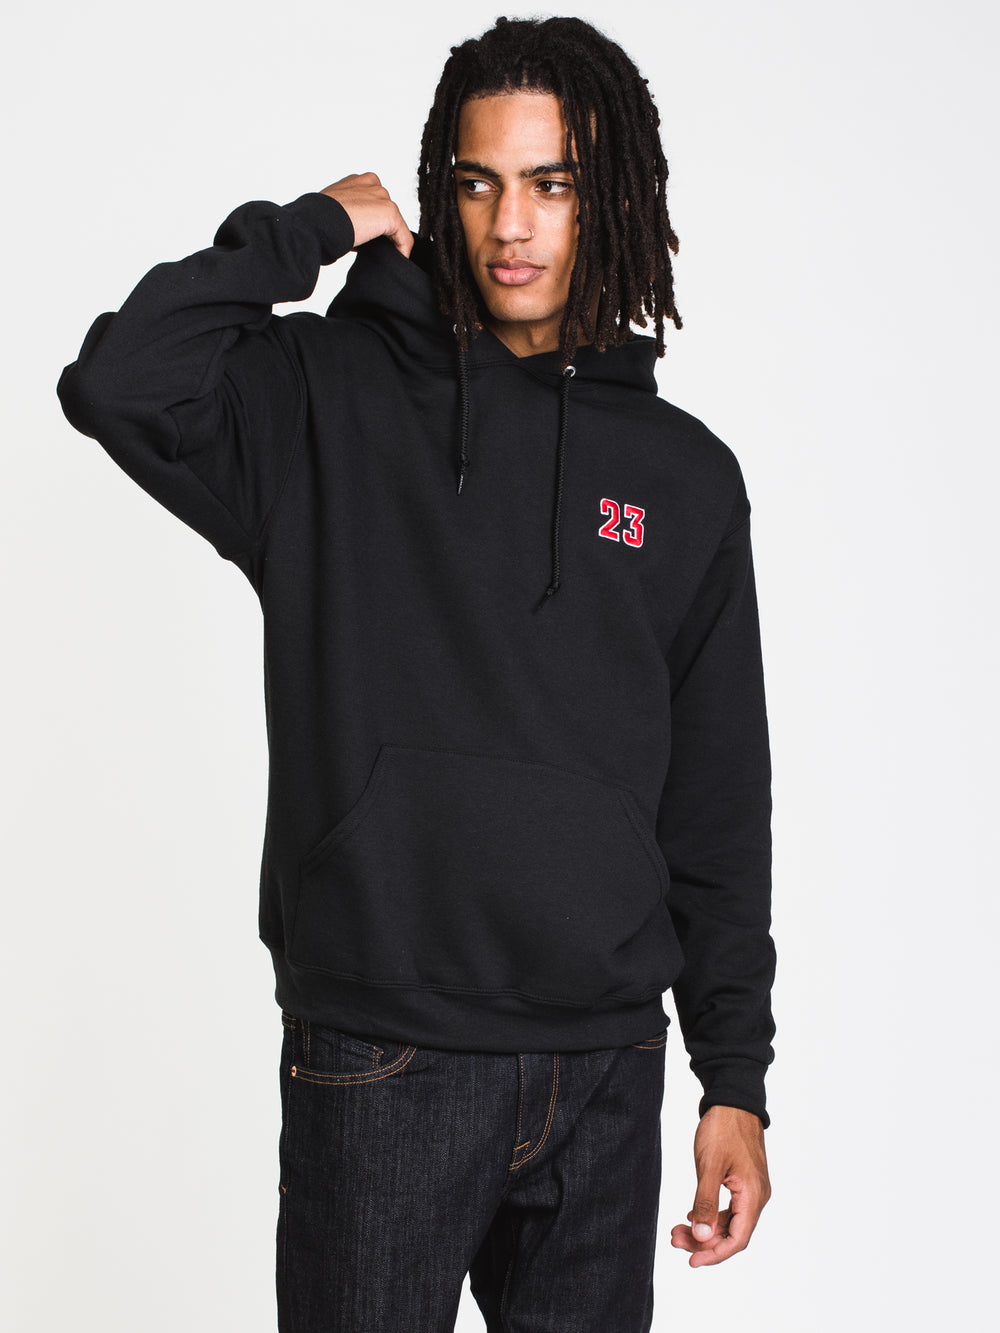 23 EMBROIDERED HOODIE - BLACK - CLEARANCE